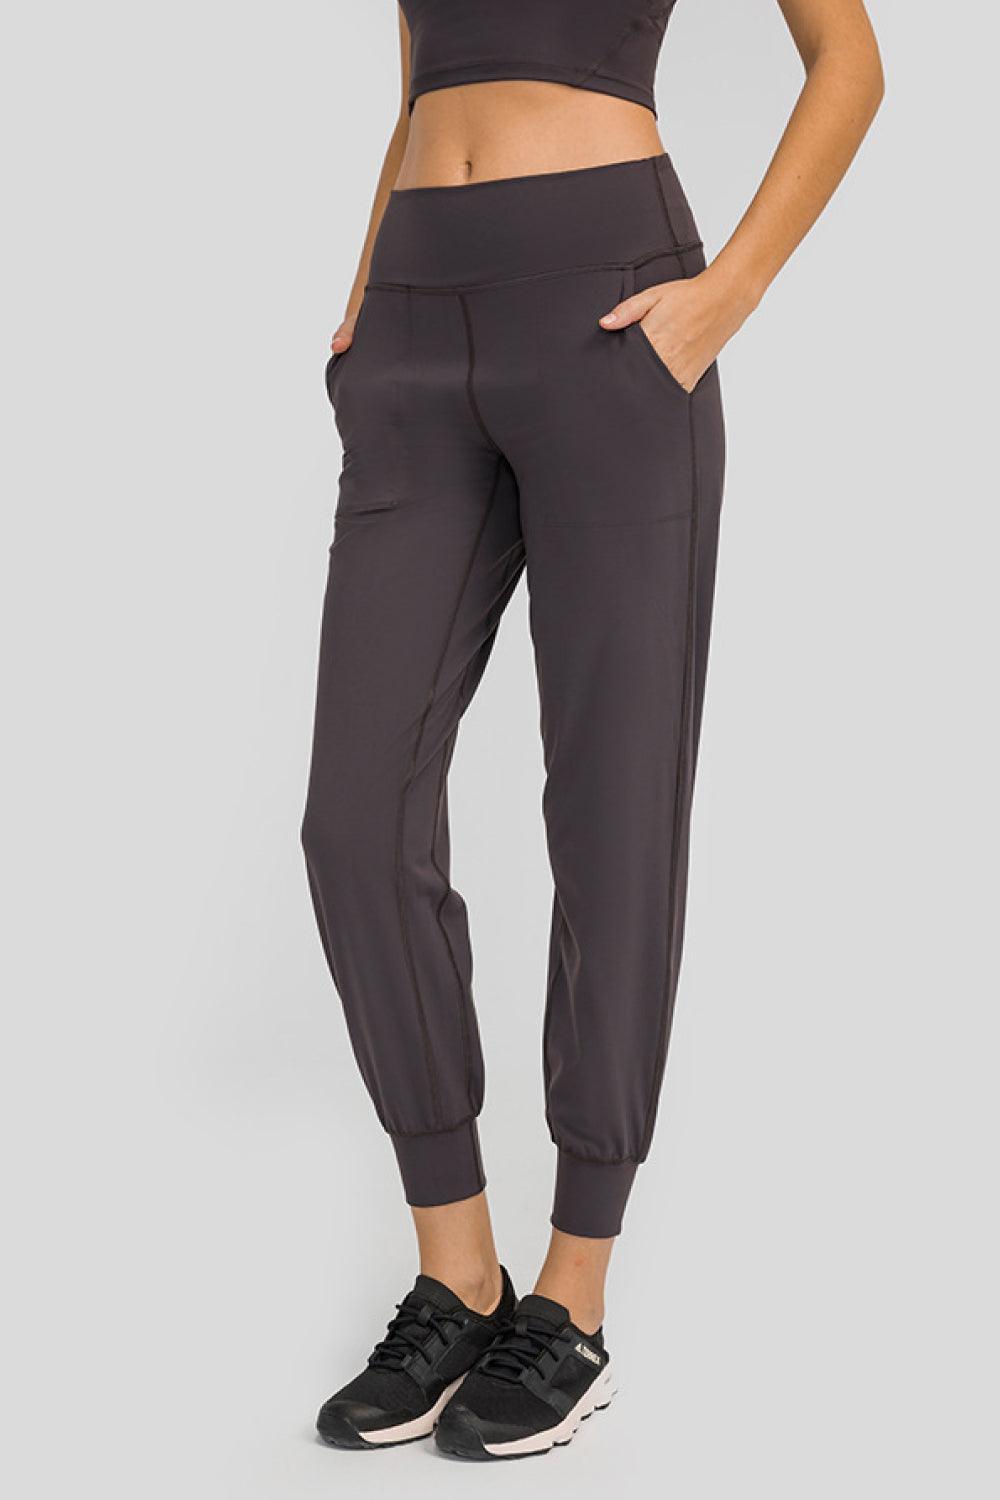 Wide Waistband Tapered Yoga Pants - Olive Ave